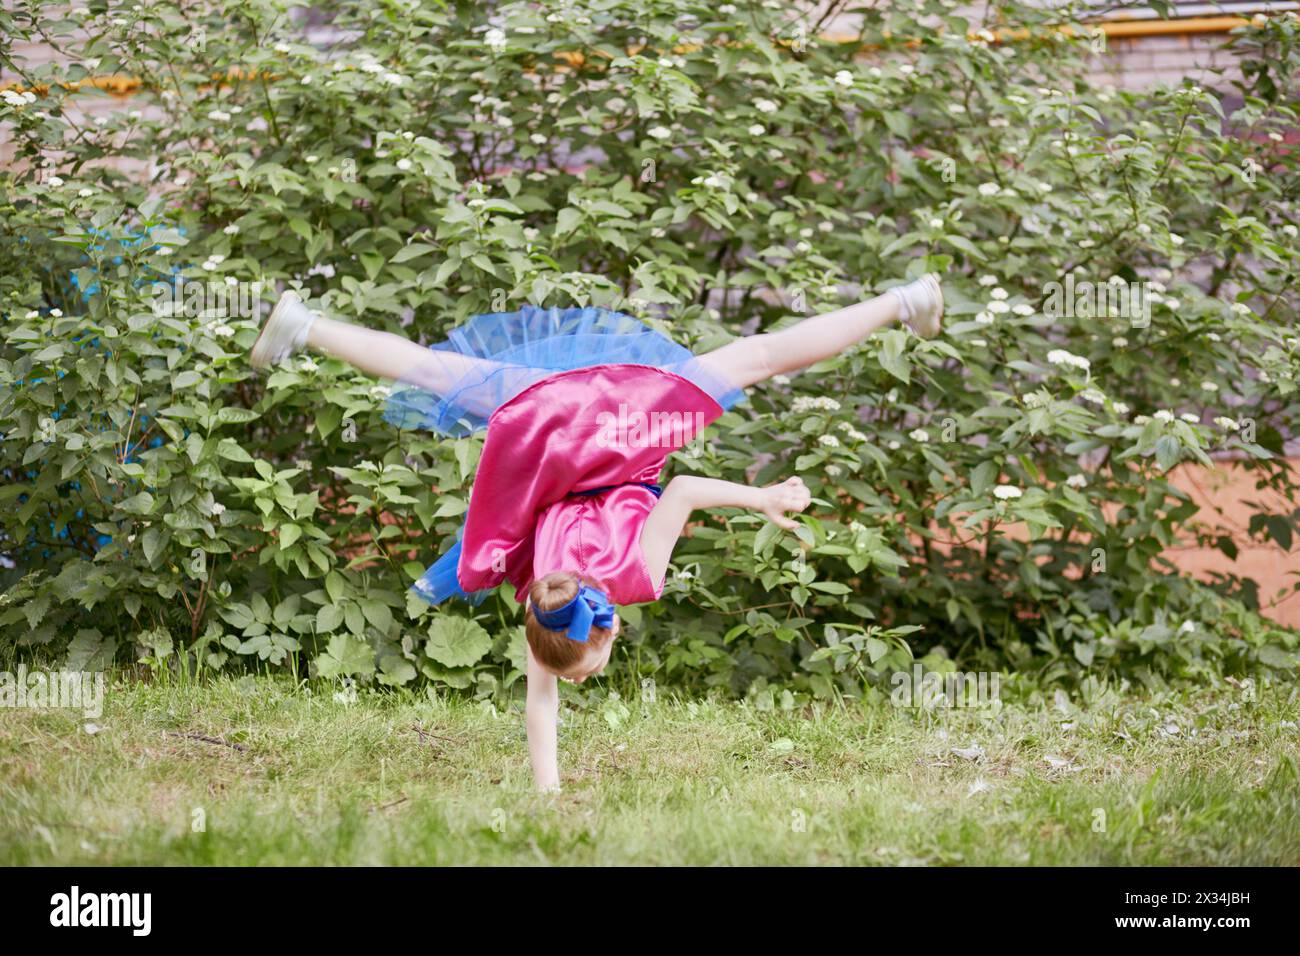 Little girl in dancing suit stands on one arm upside down at grassy lawn. Stock Photo